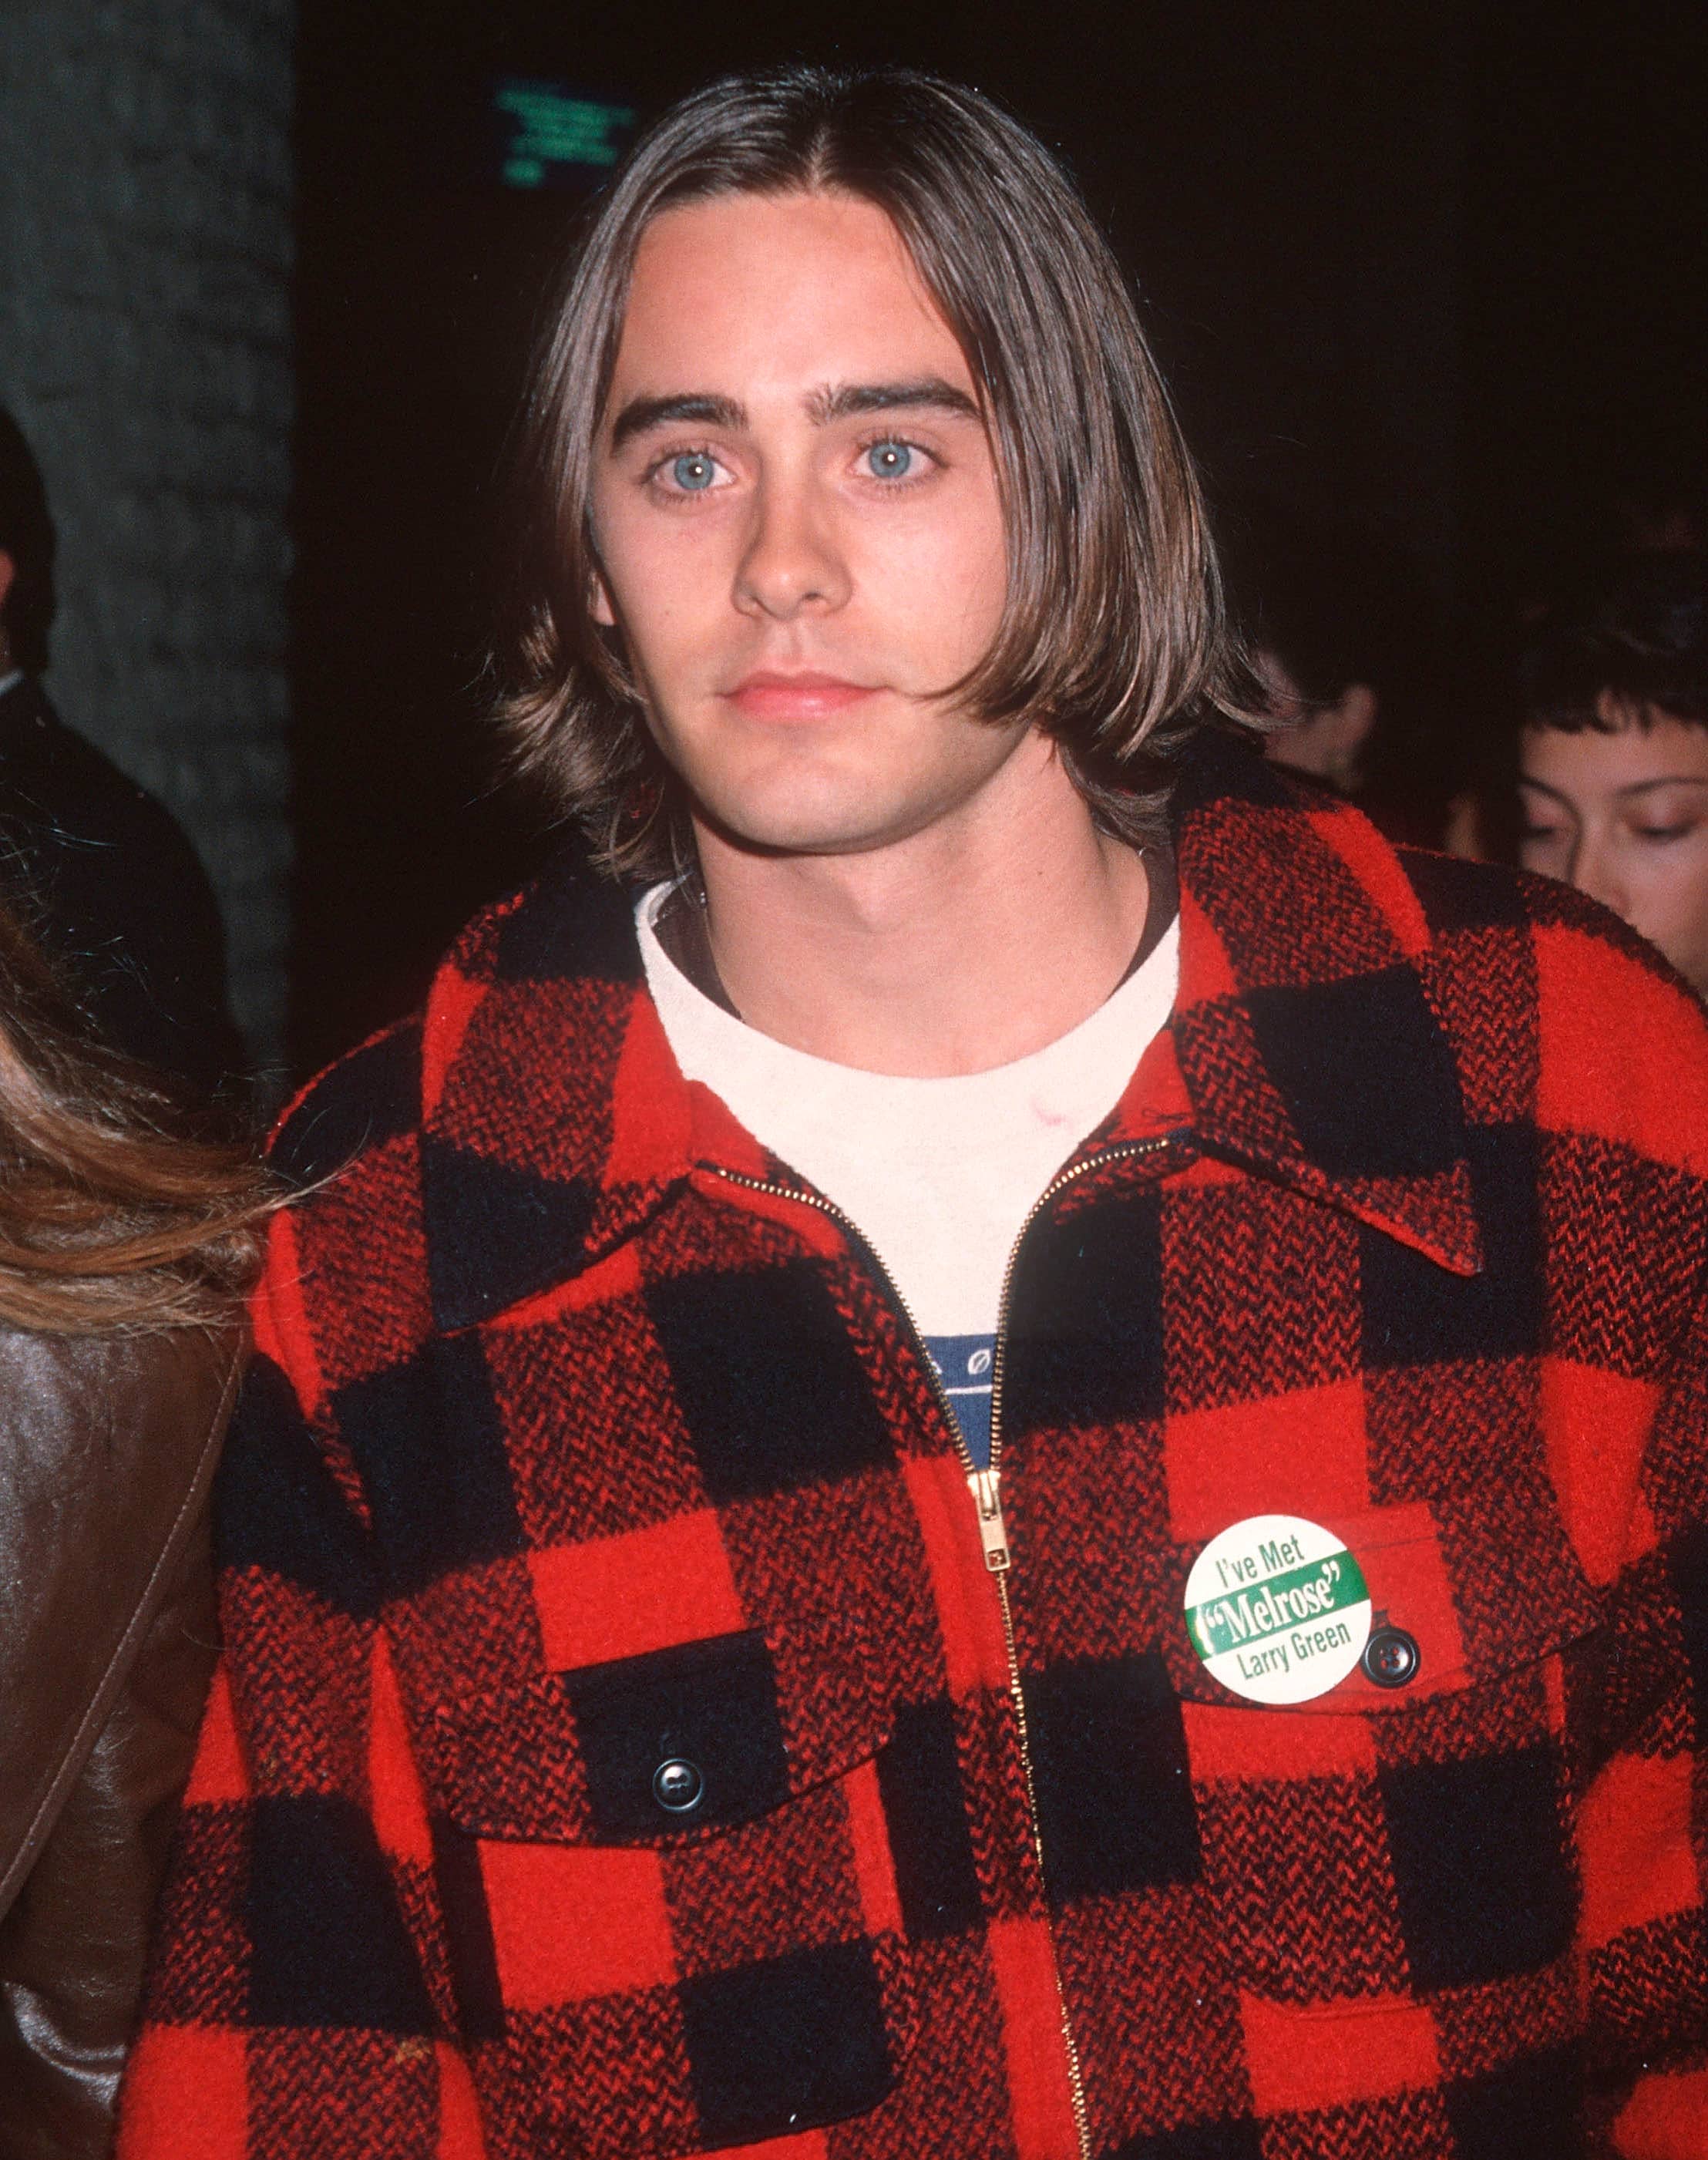 8 '90s Fashion Trends That Are Making a Comeback